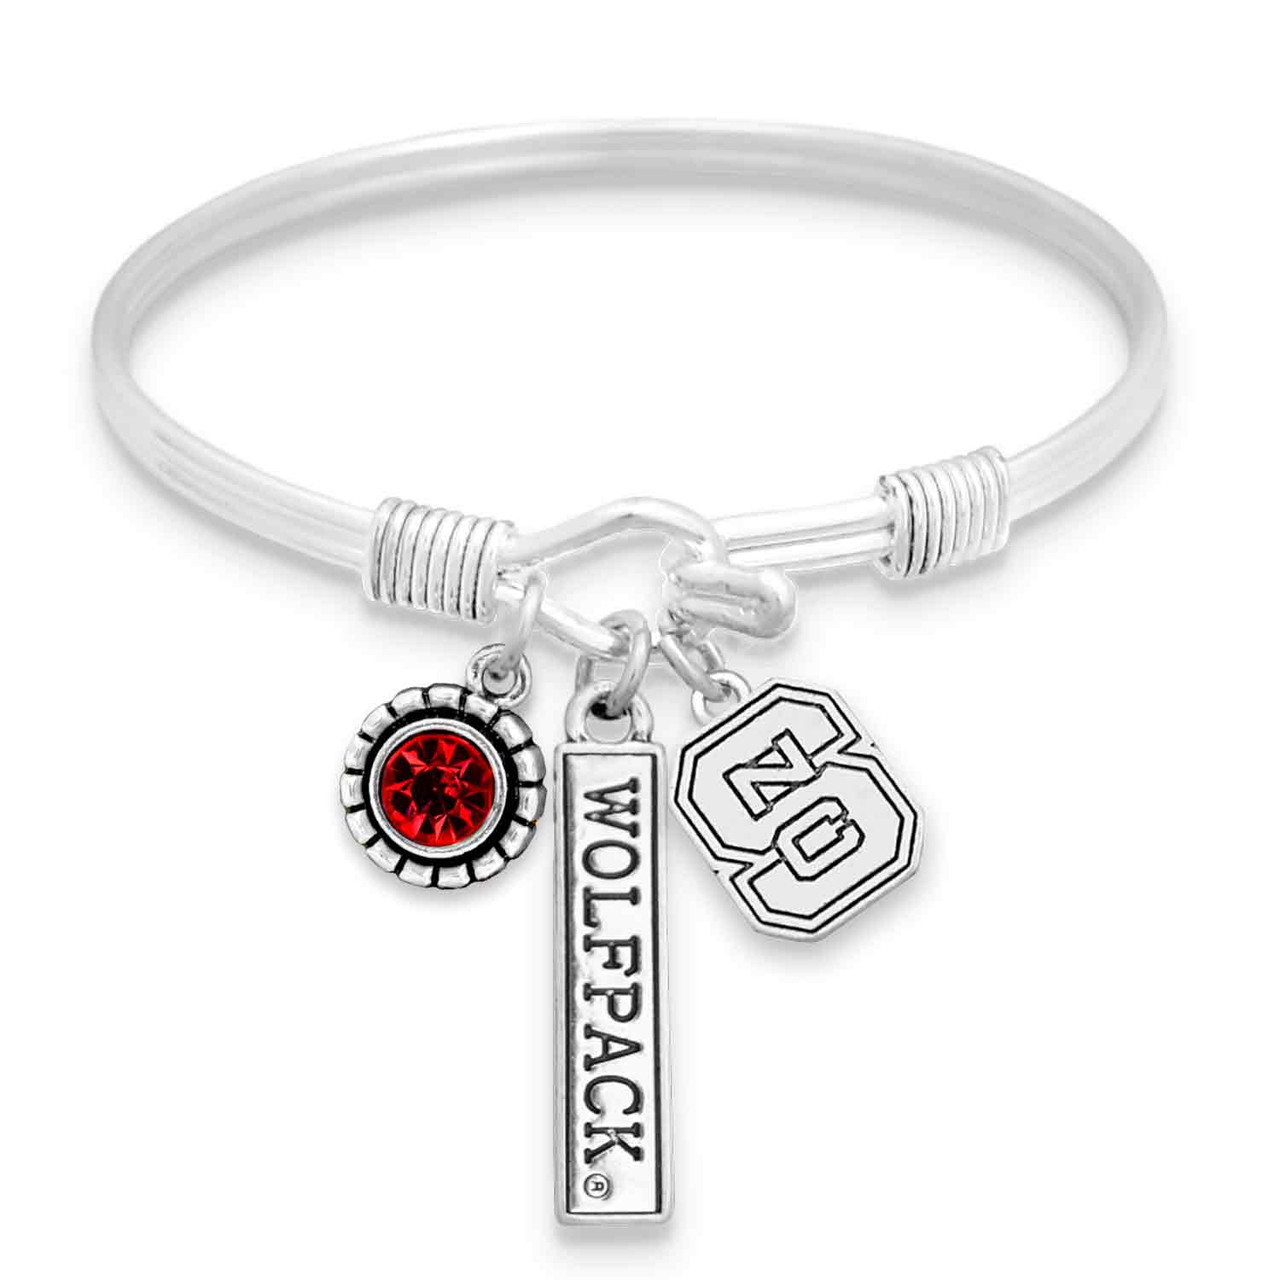 NC State Wolfpack Bracelet- Trifecta-NCS57228